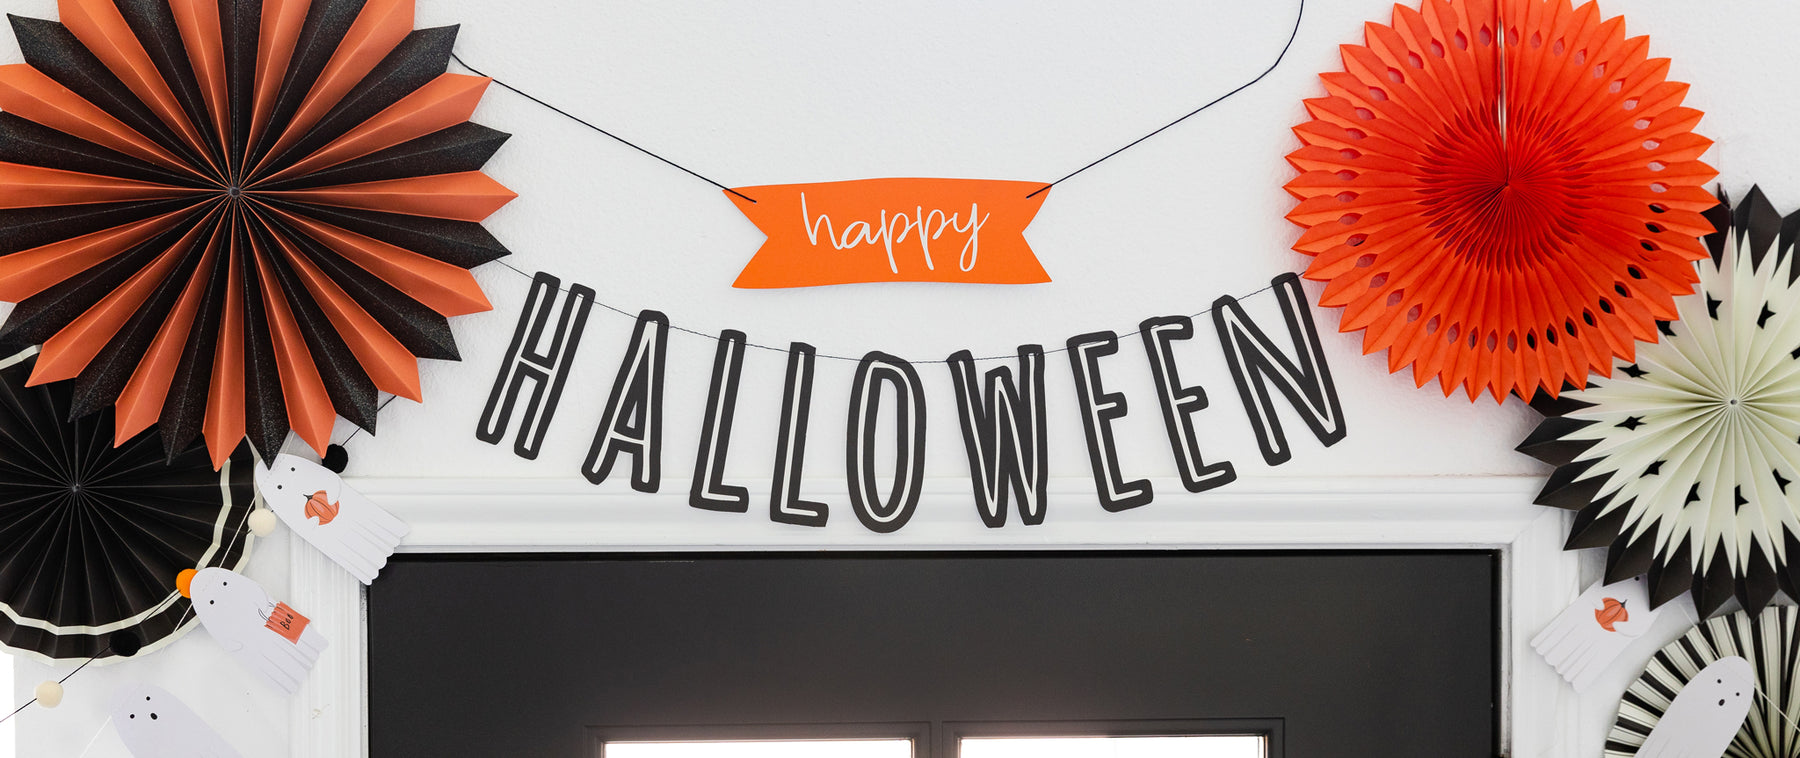 Welcome your boo crew with these ghoulish Halloween banners, garlands, and fan sets. This collection of Halloween decor includes die cut banners, spellbinding ghosts and ghoulish skeletons that will add a spooky effect to any space.